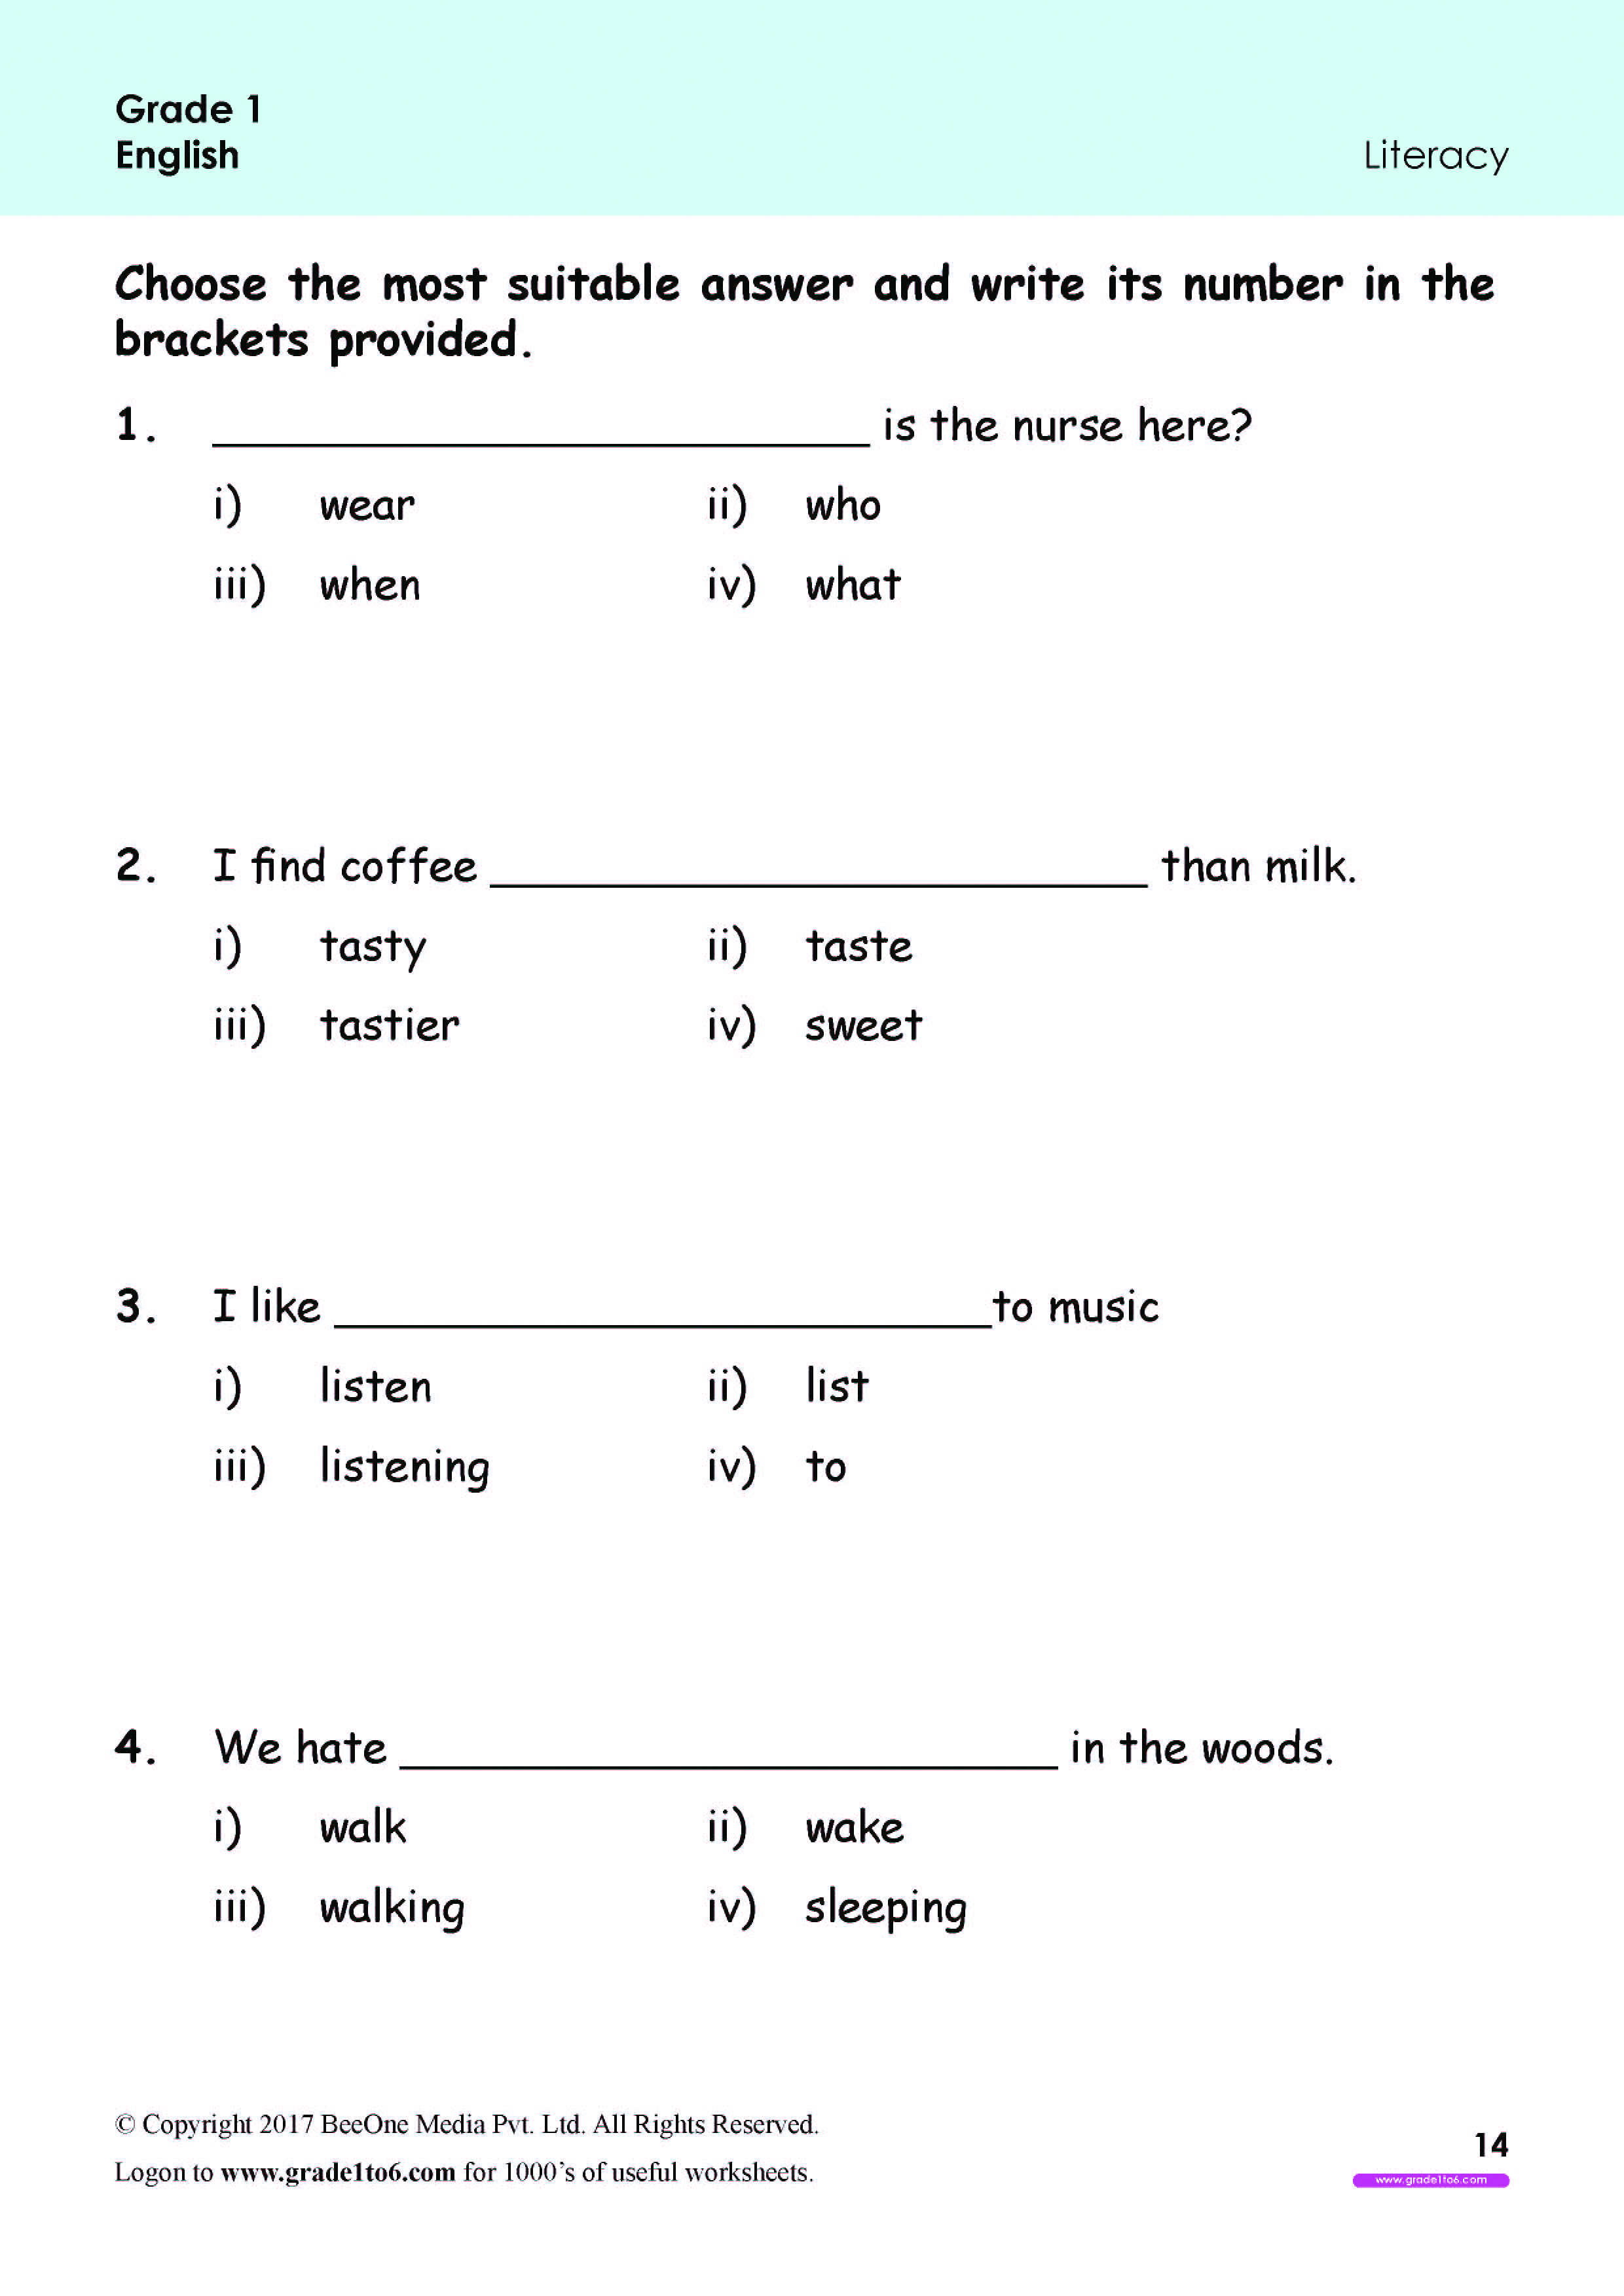 english-literacy-worksheets-for-grade-1-www-grade1to6